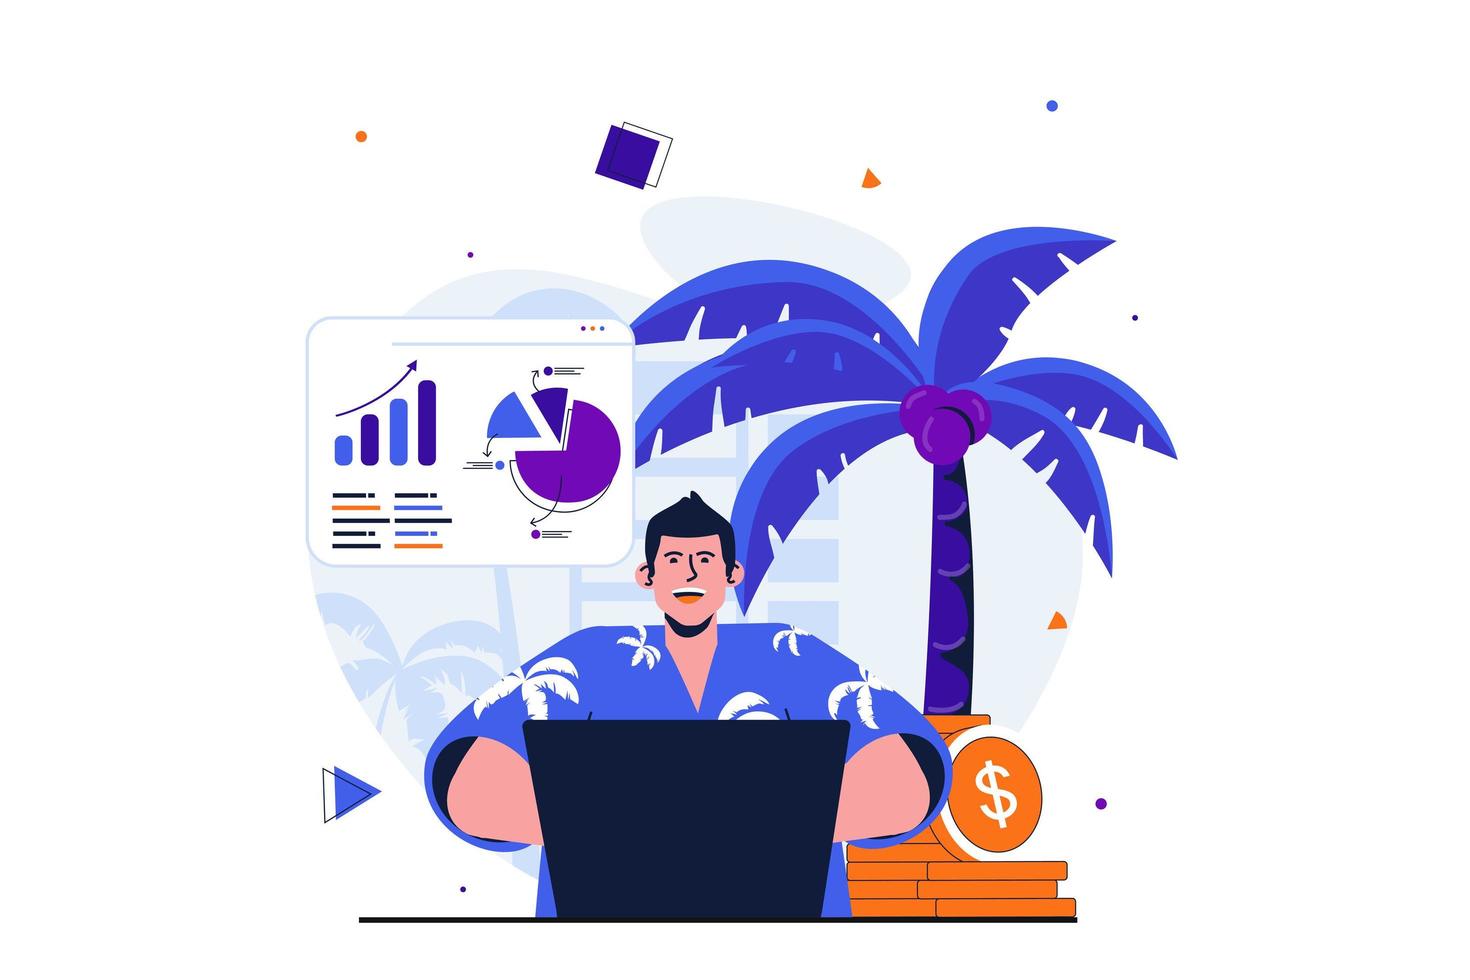 Freelance working modern flat concept for web banner design. Manager analyzes data and statistics from laptop while working online from tropical island. Vector illustration with isolated people scene